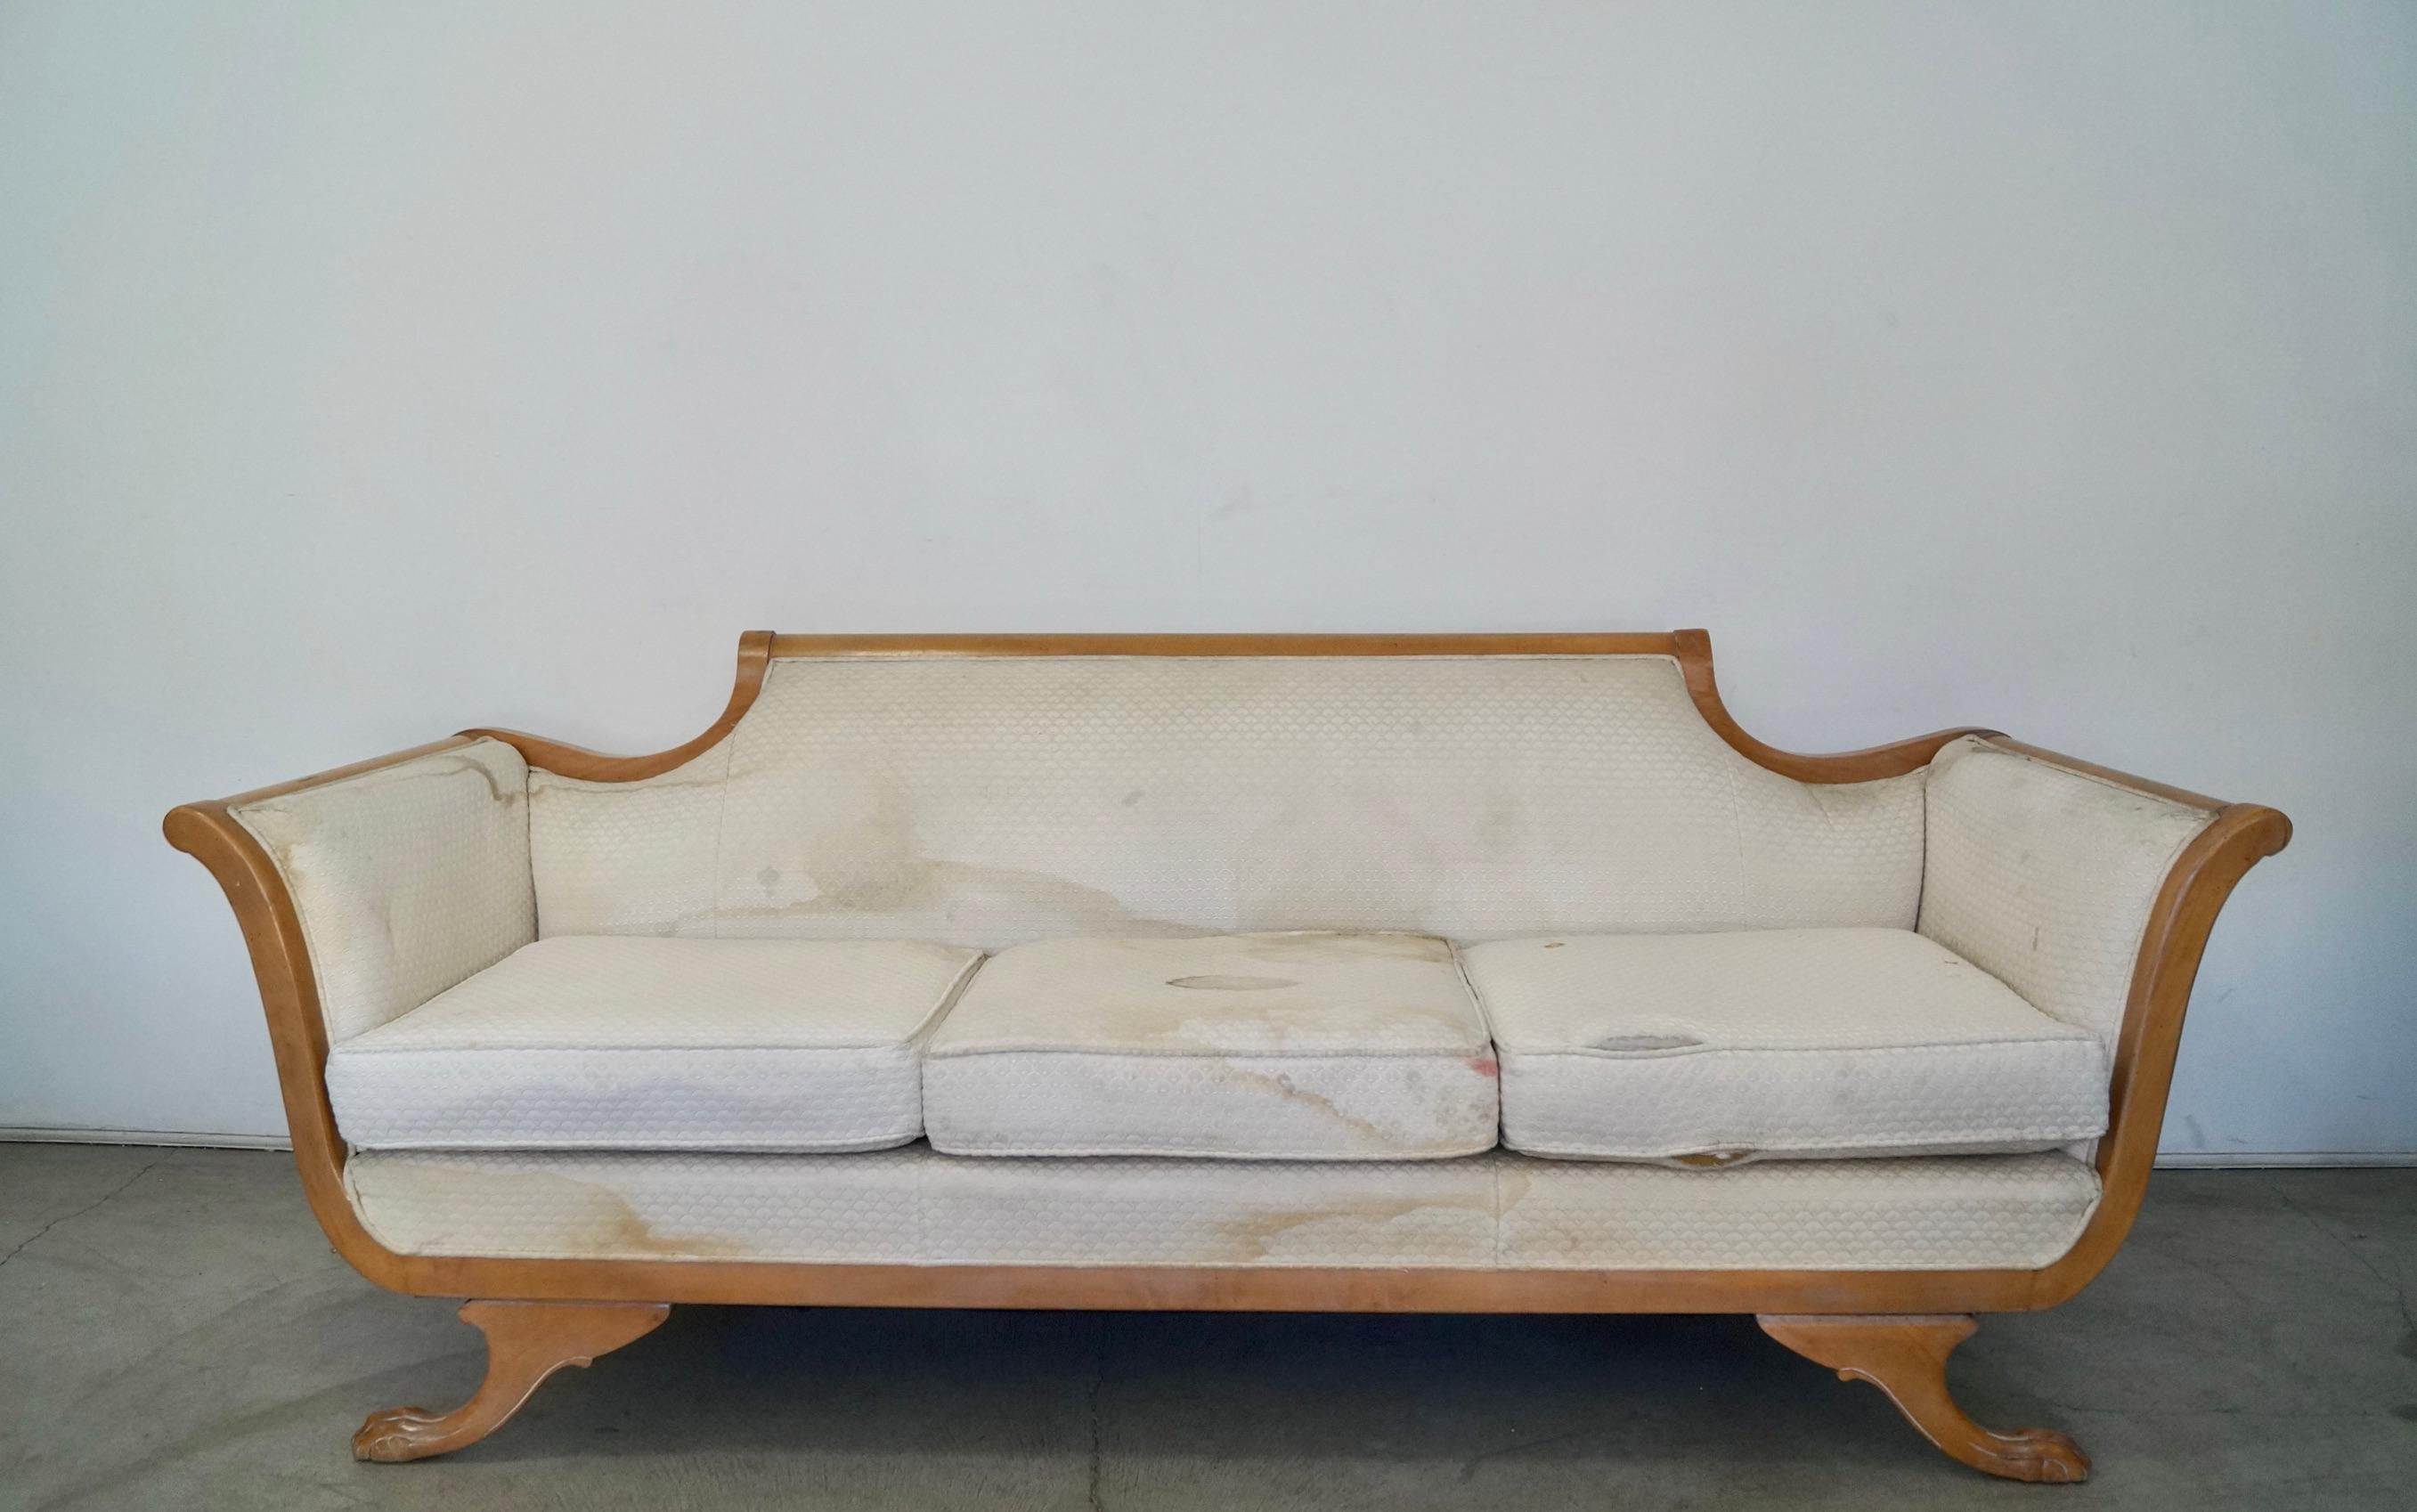 Vintage 1970's Hollywood Regency couch for sale. It has the original light wood finish. It's really well made, and has coil springs on the seatrest and springs on the backrest. It's structurally in excellent condition, and has a light wood finish.